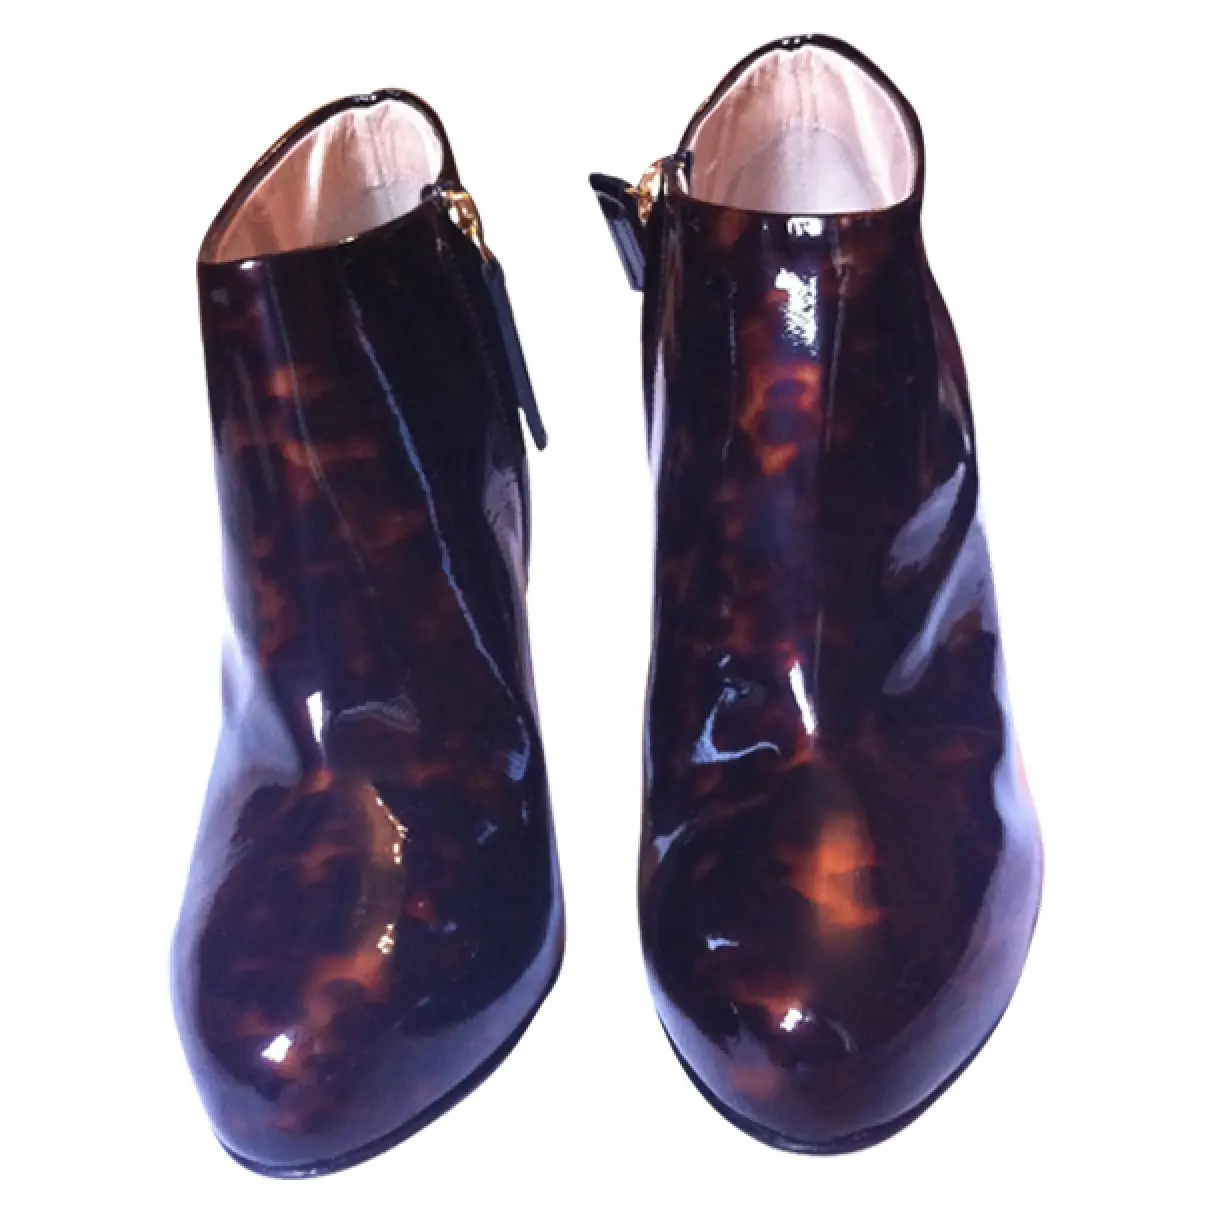 Giuseppe Zanotti Patent leather ankle boots for sale